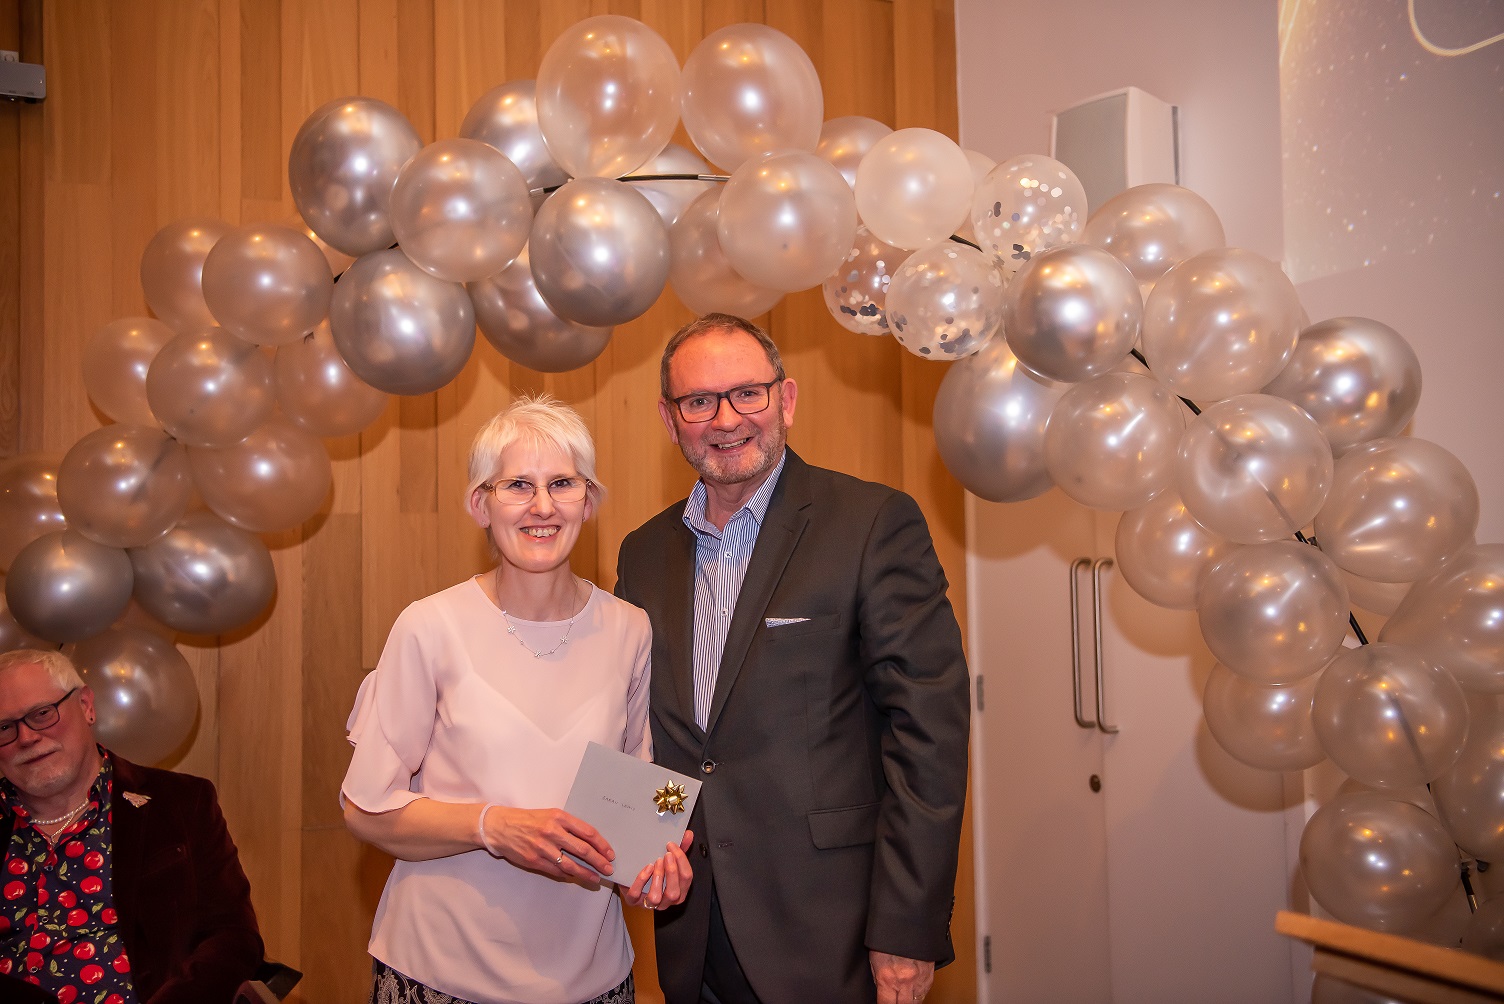 Bield hosts award ceremony to celebrate employees going the extra mile